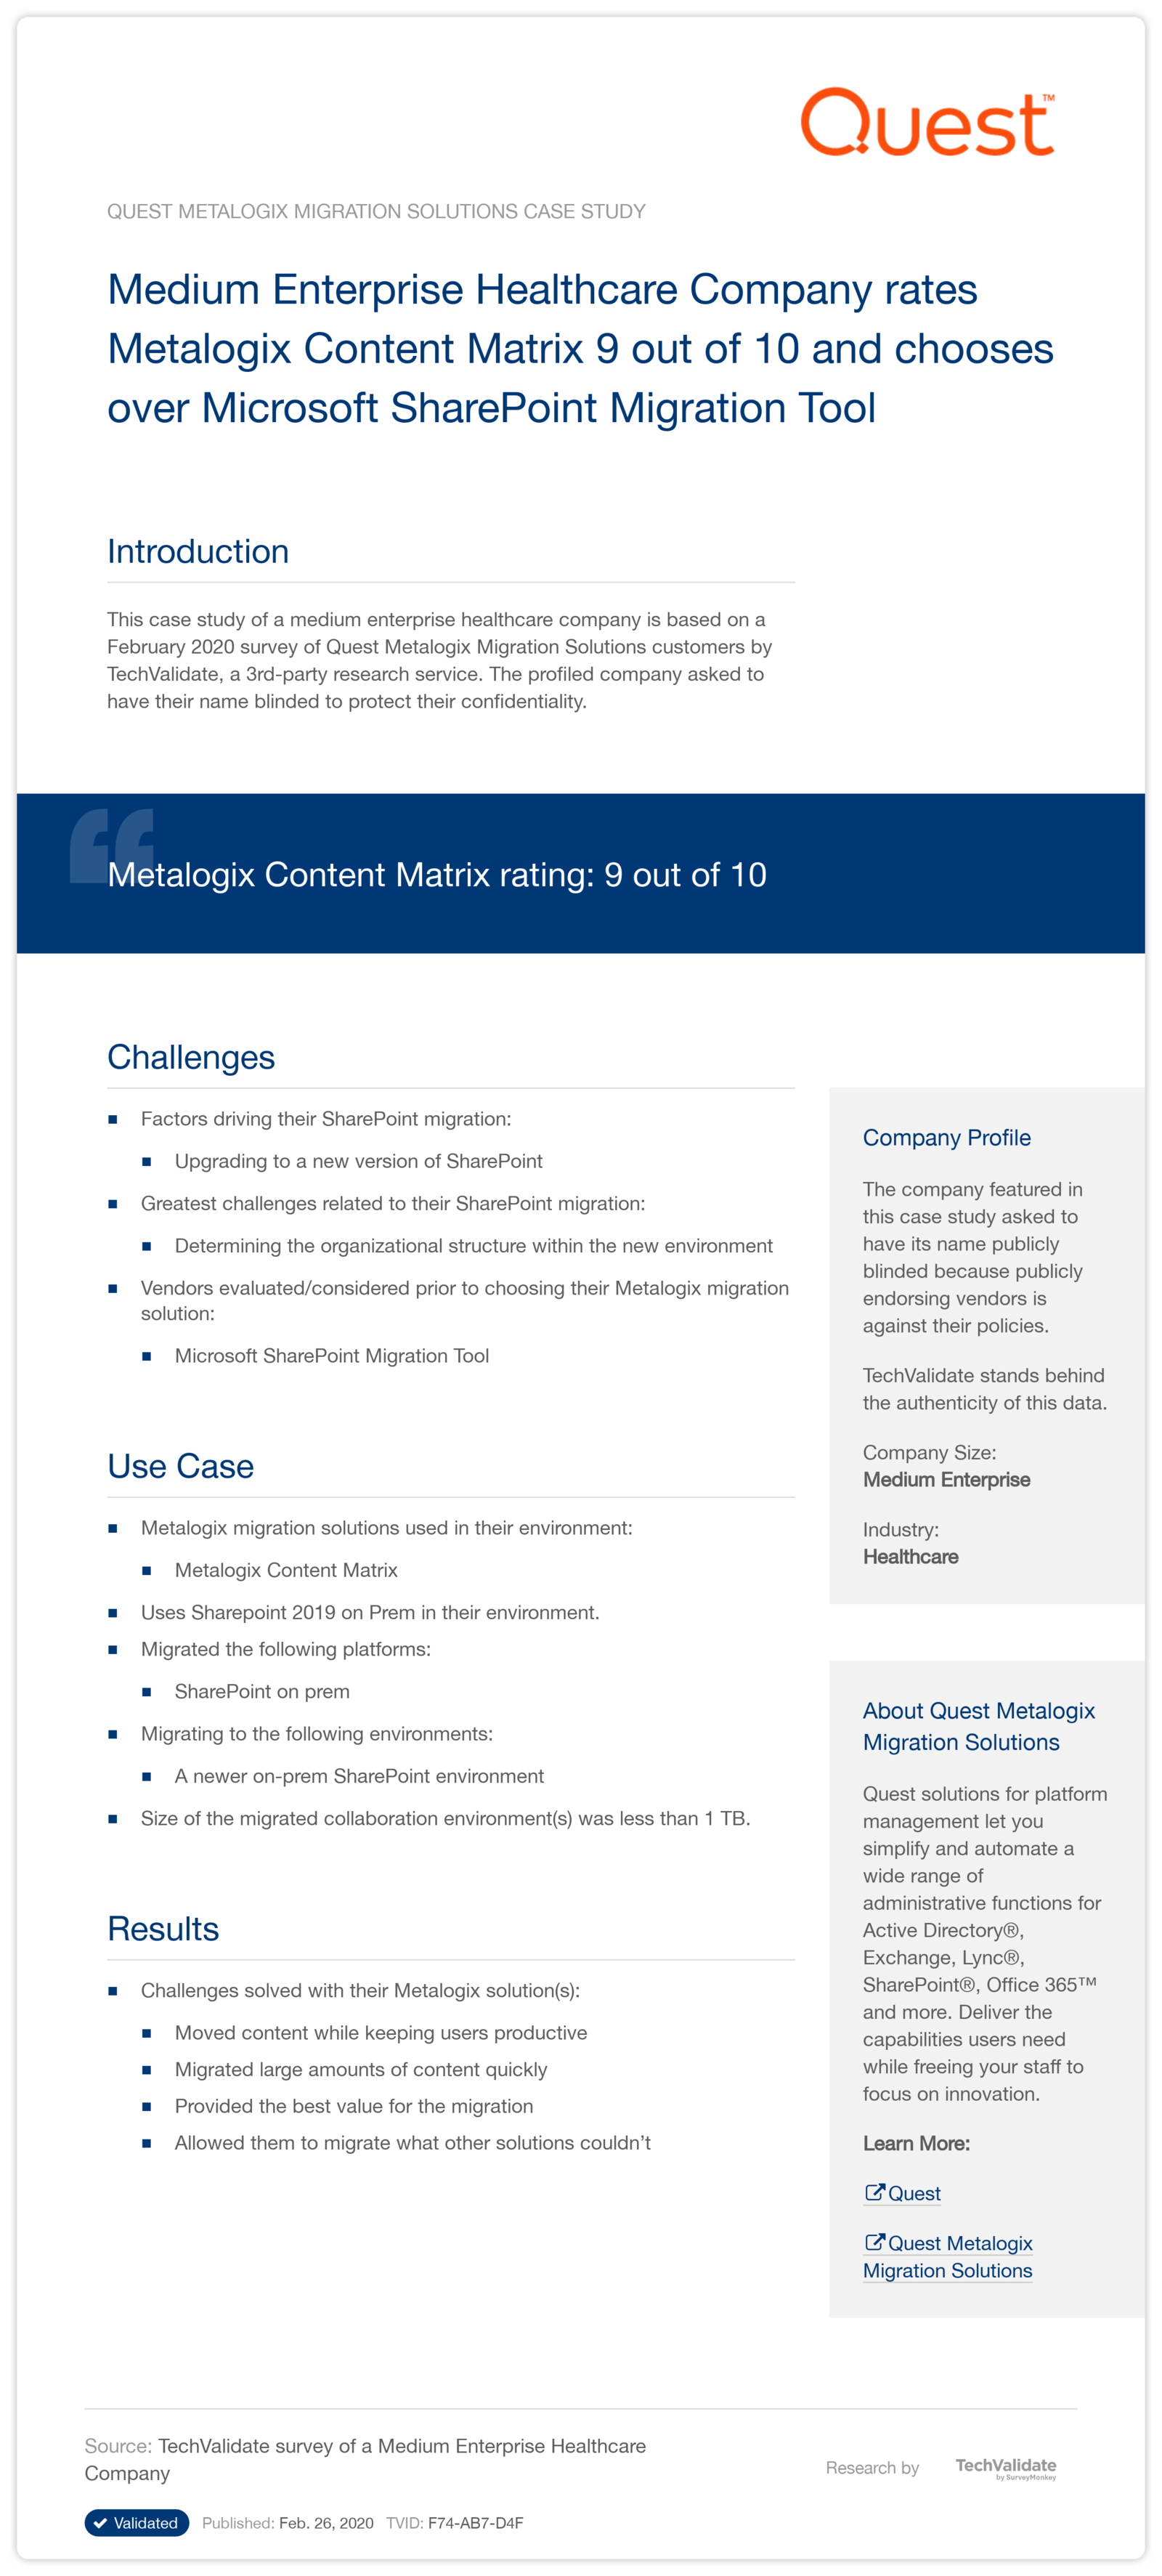 Medium Enterprise Healthcare Company rates Metalogix Content Matrix 9 out of 10 and chooses over Microsoft SharePoint Migration Tool